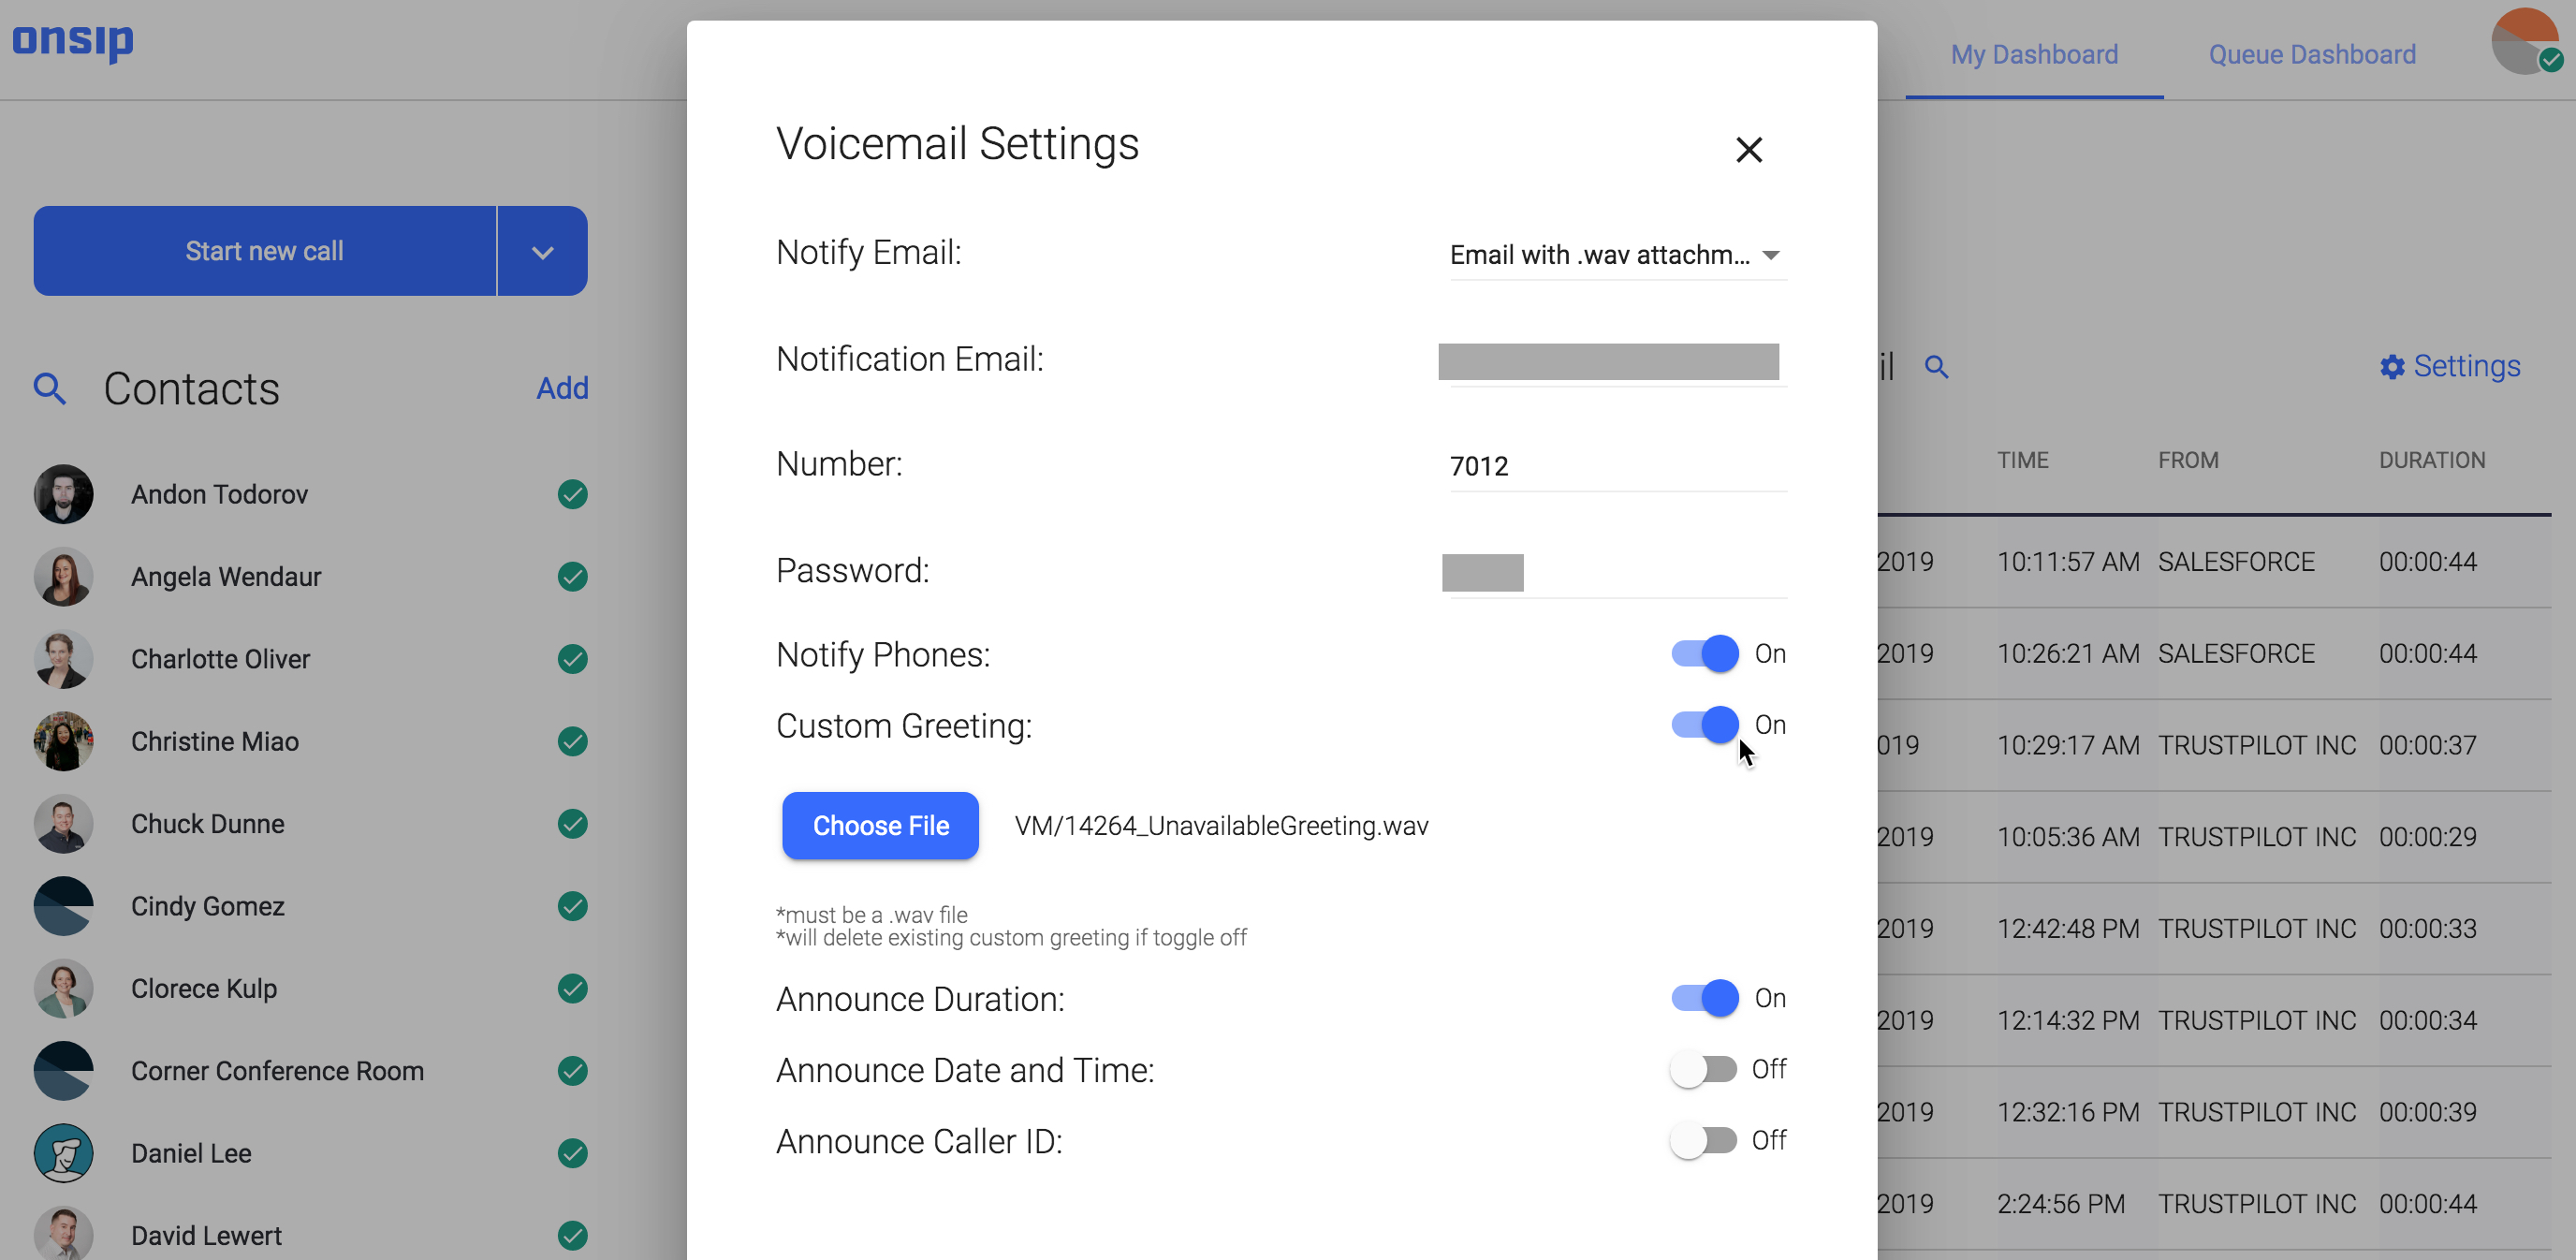 onsip voicemail